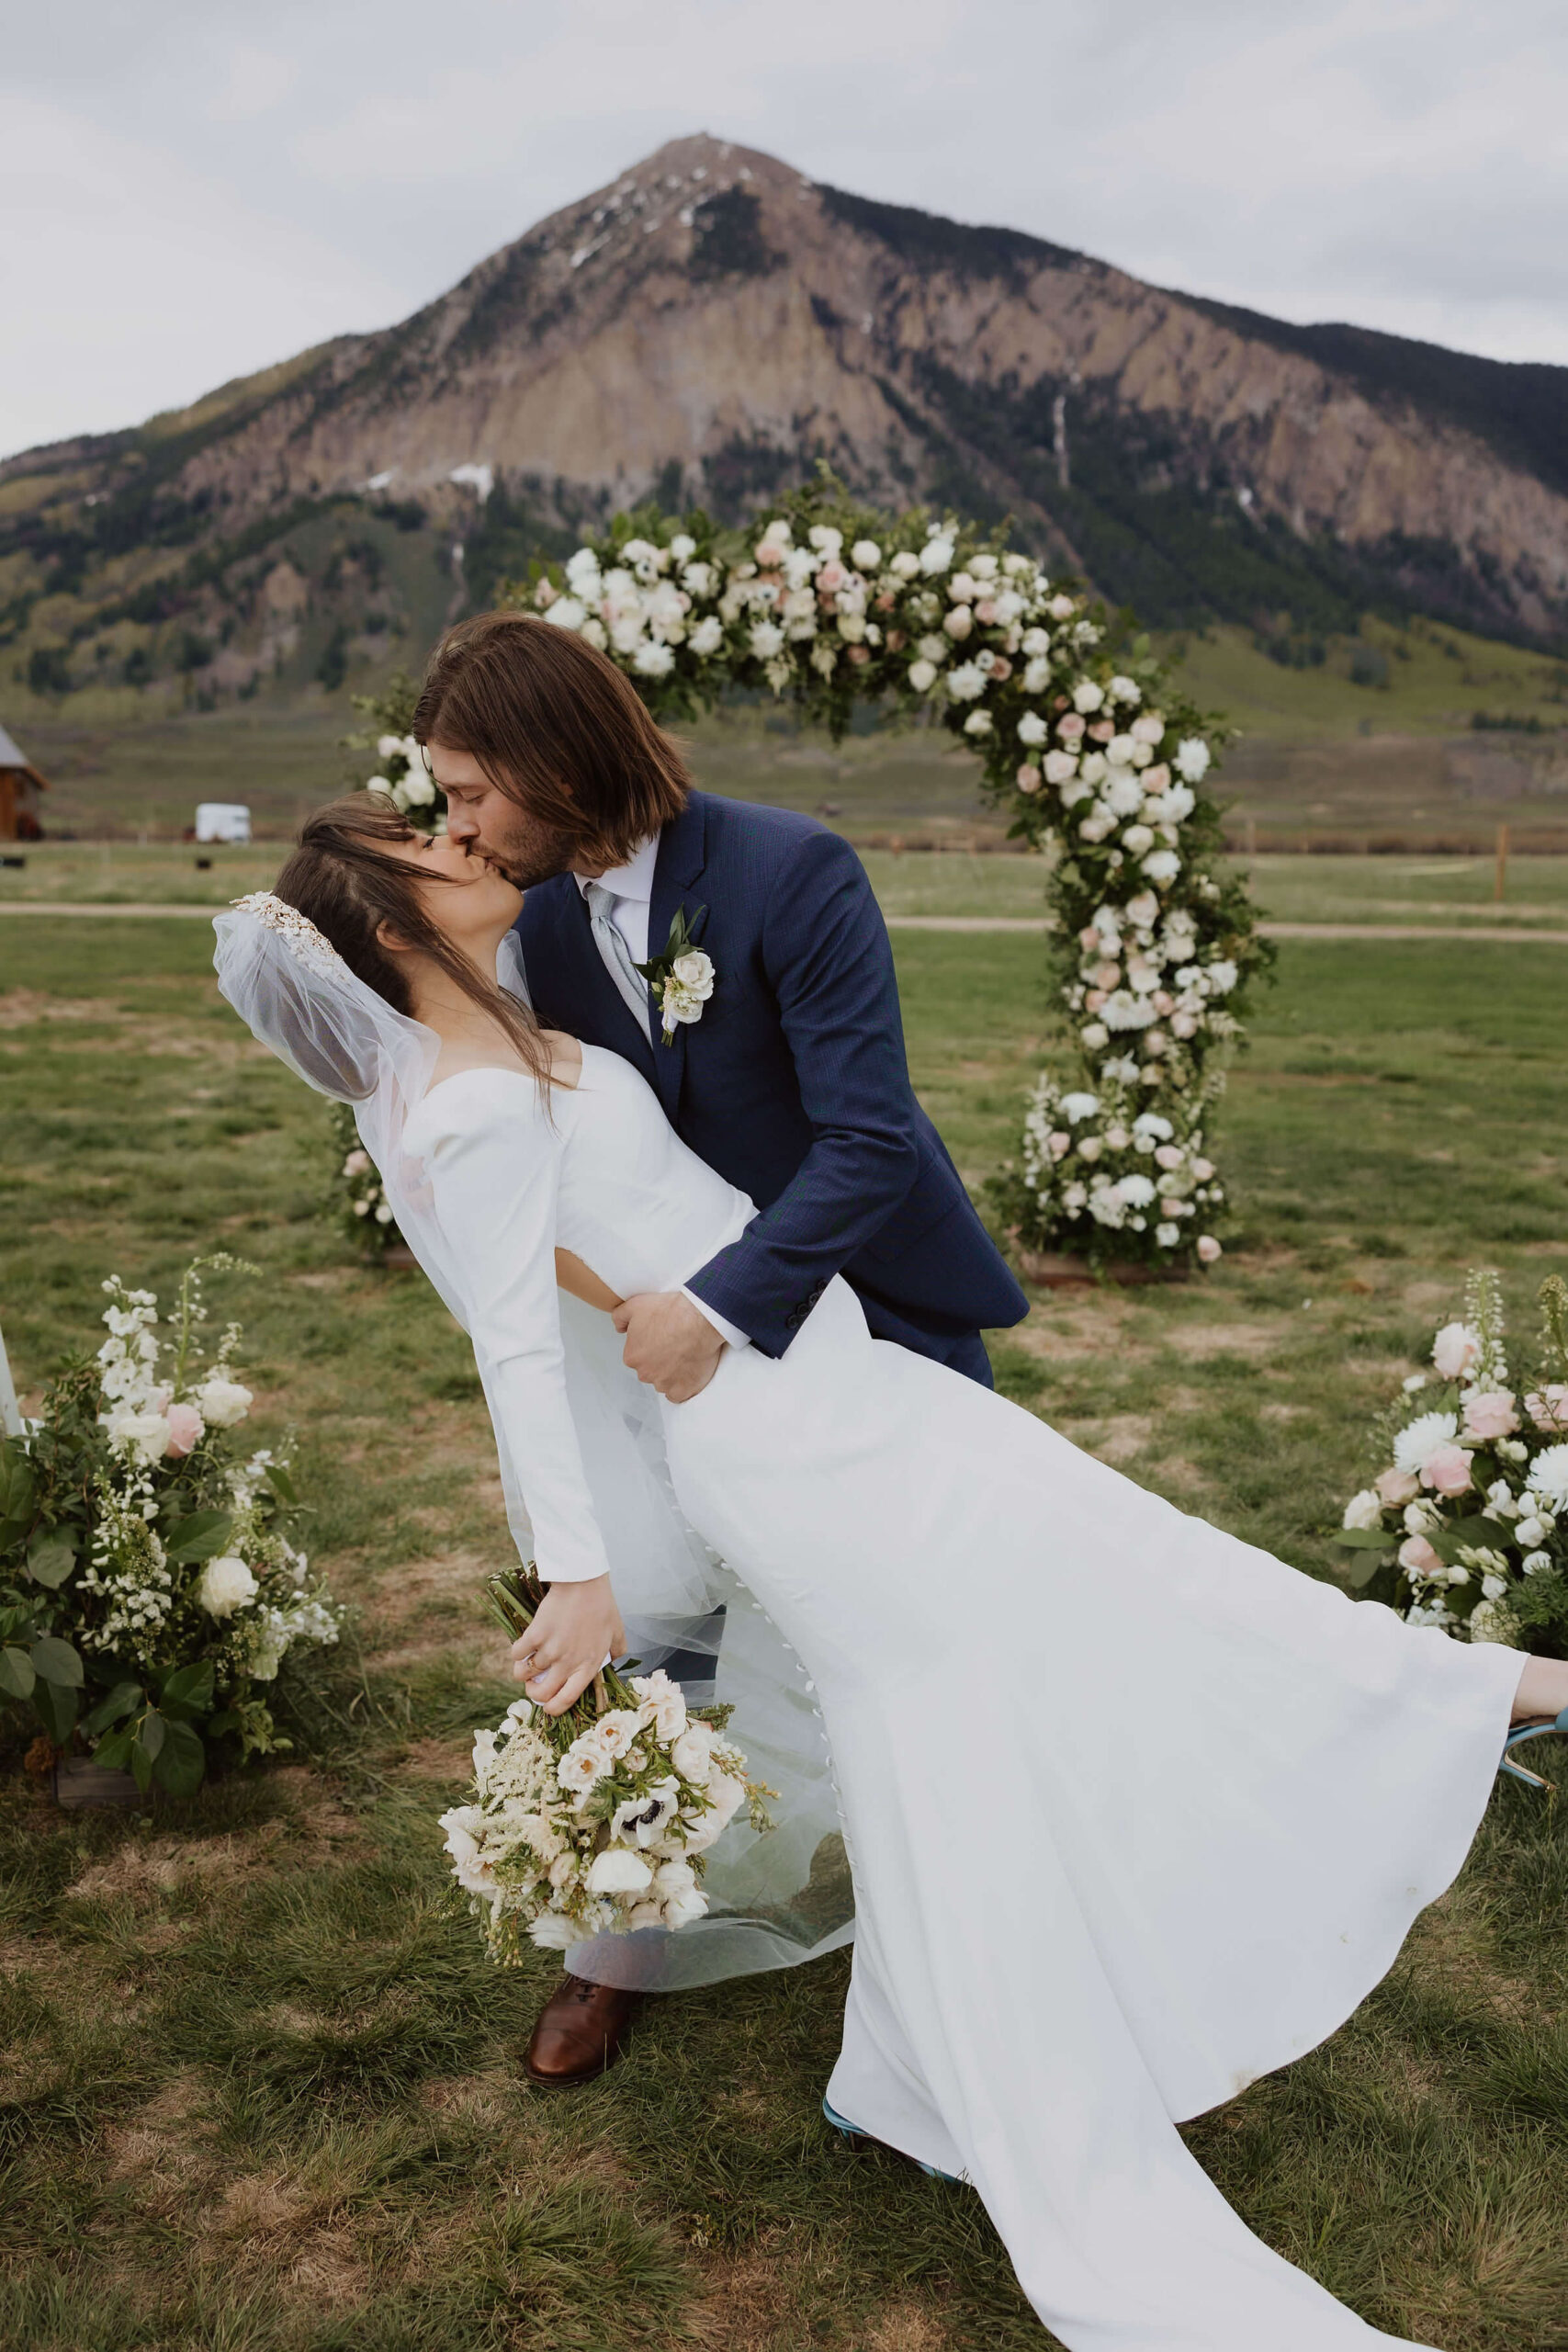 Couple getting married in Colorado and posing for picture at ceremony site